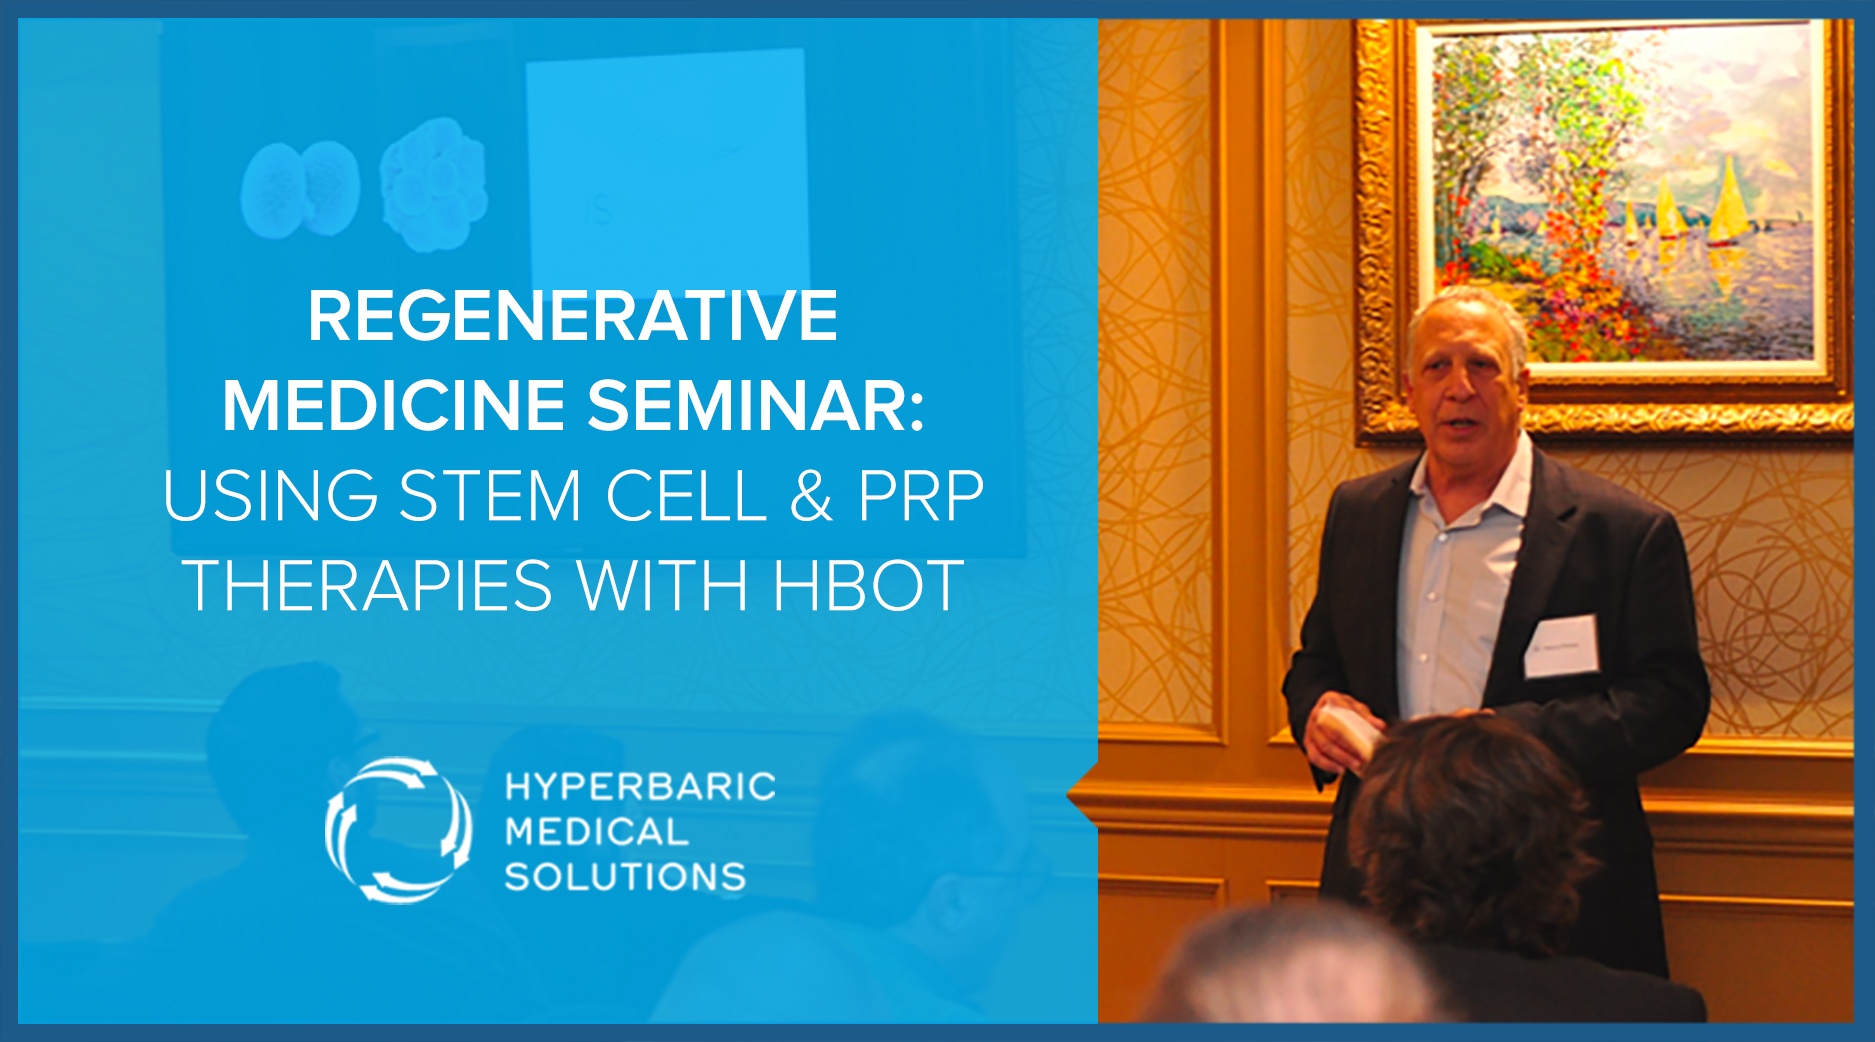 REGENERATIVE MEDICINE SEMINAR: USING STEM CELL & PRP THERAPIES WITH HBOT